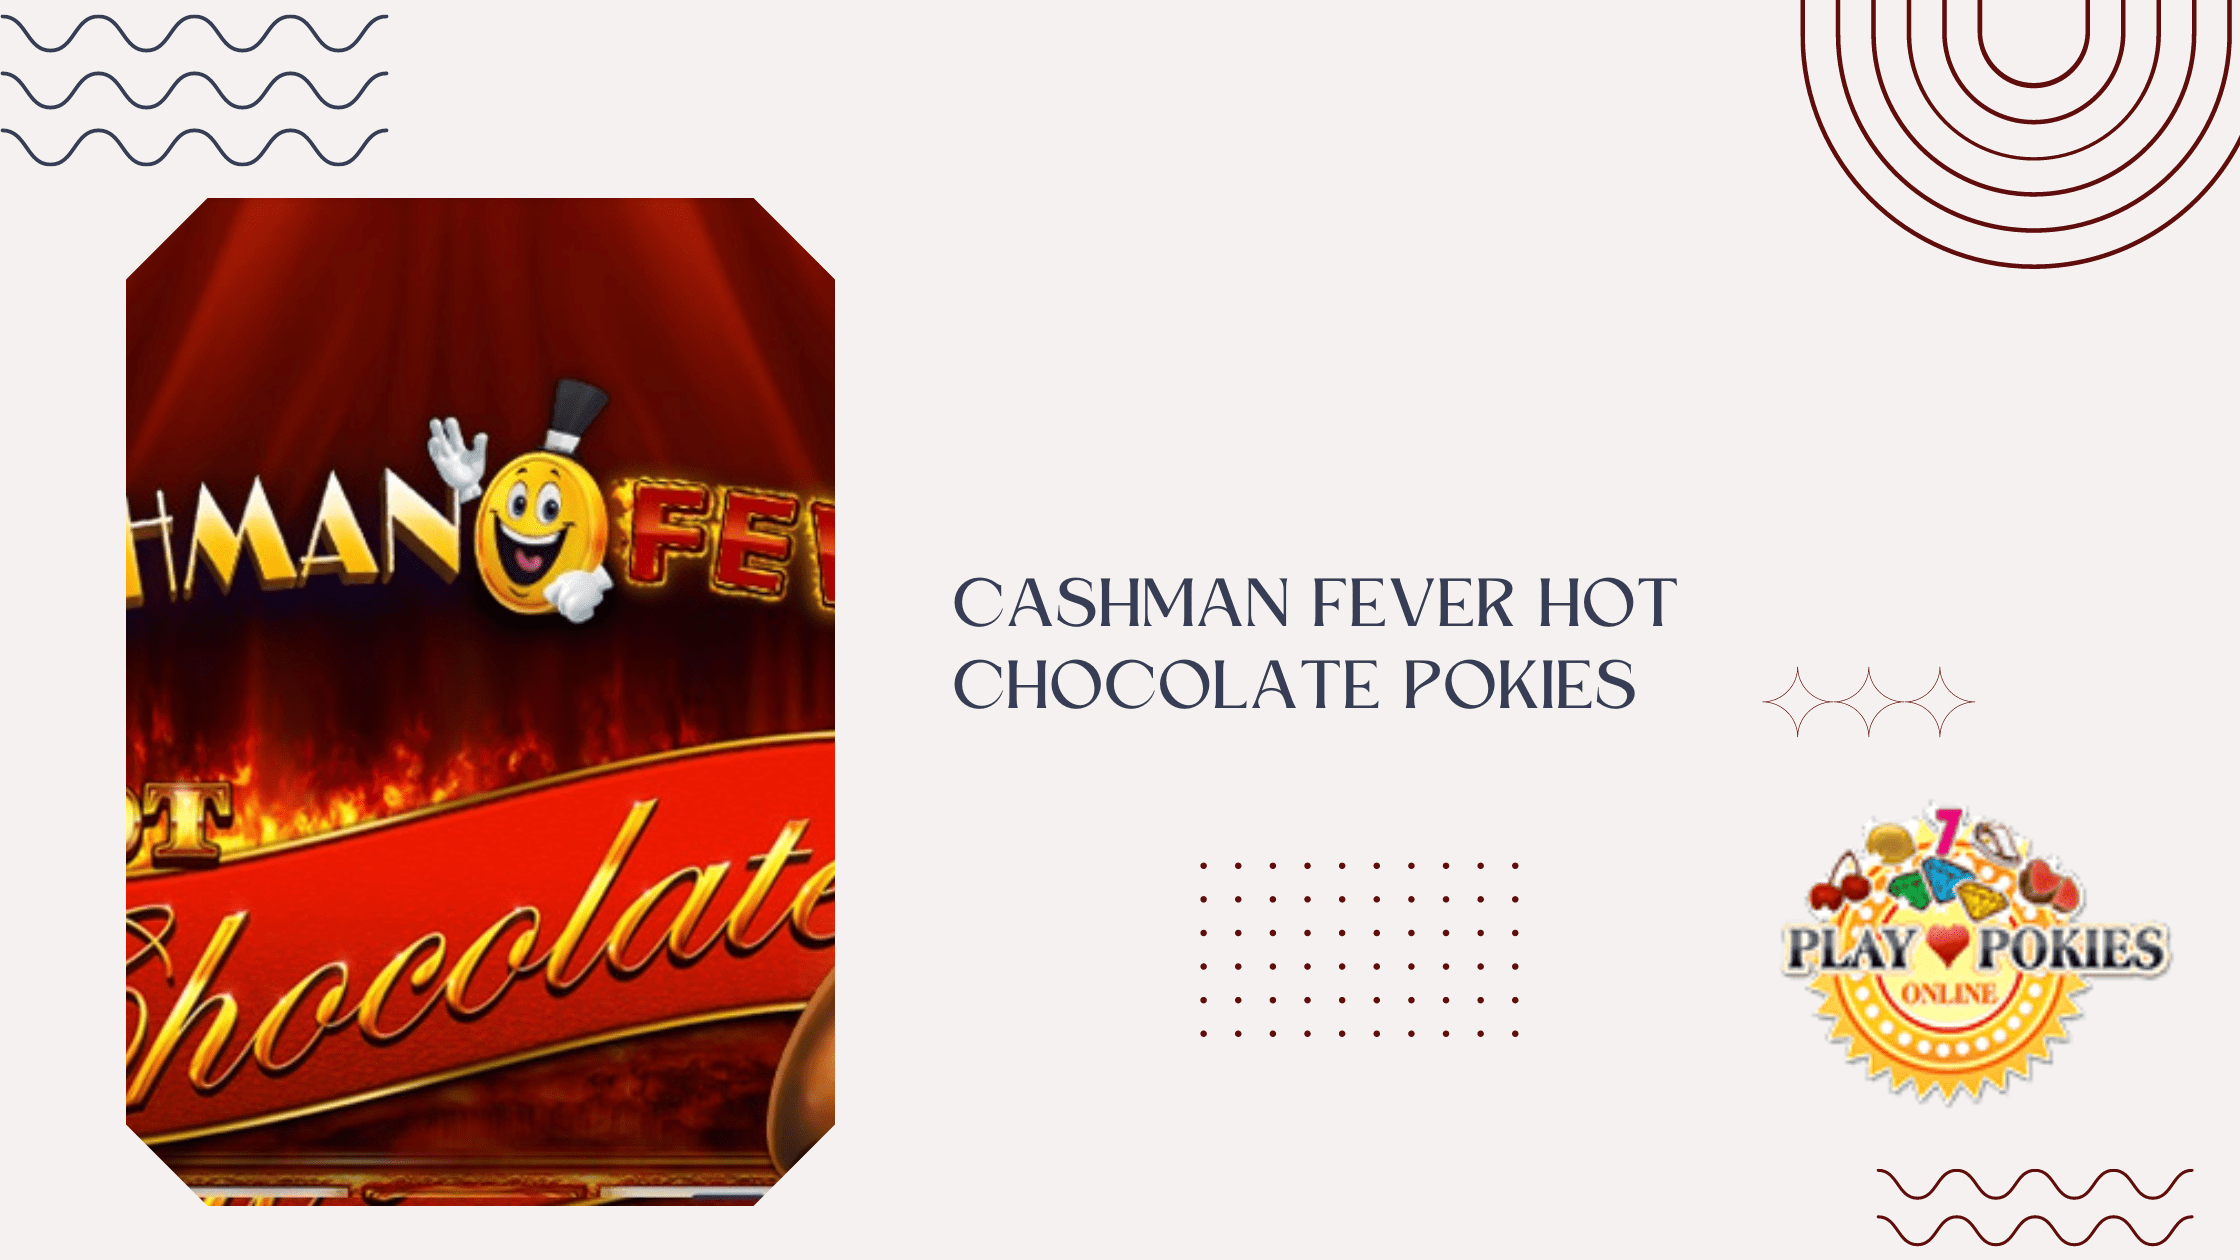 How to Play Cashman Fever Hot Chocolate Pokies for Free on Mobile